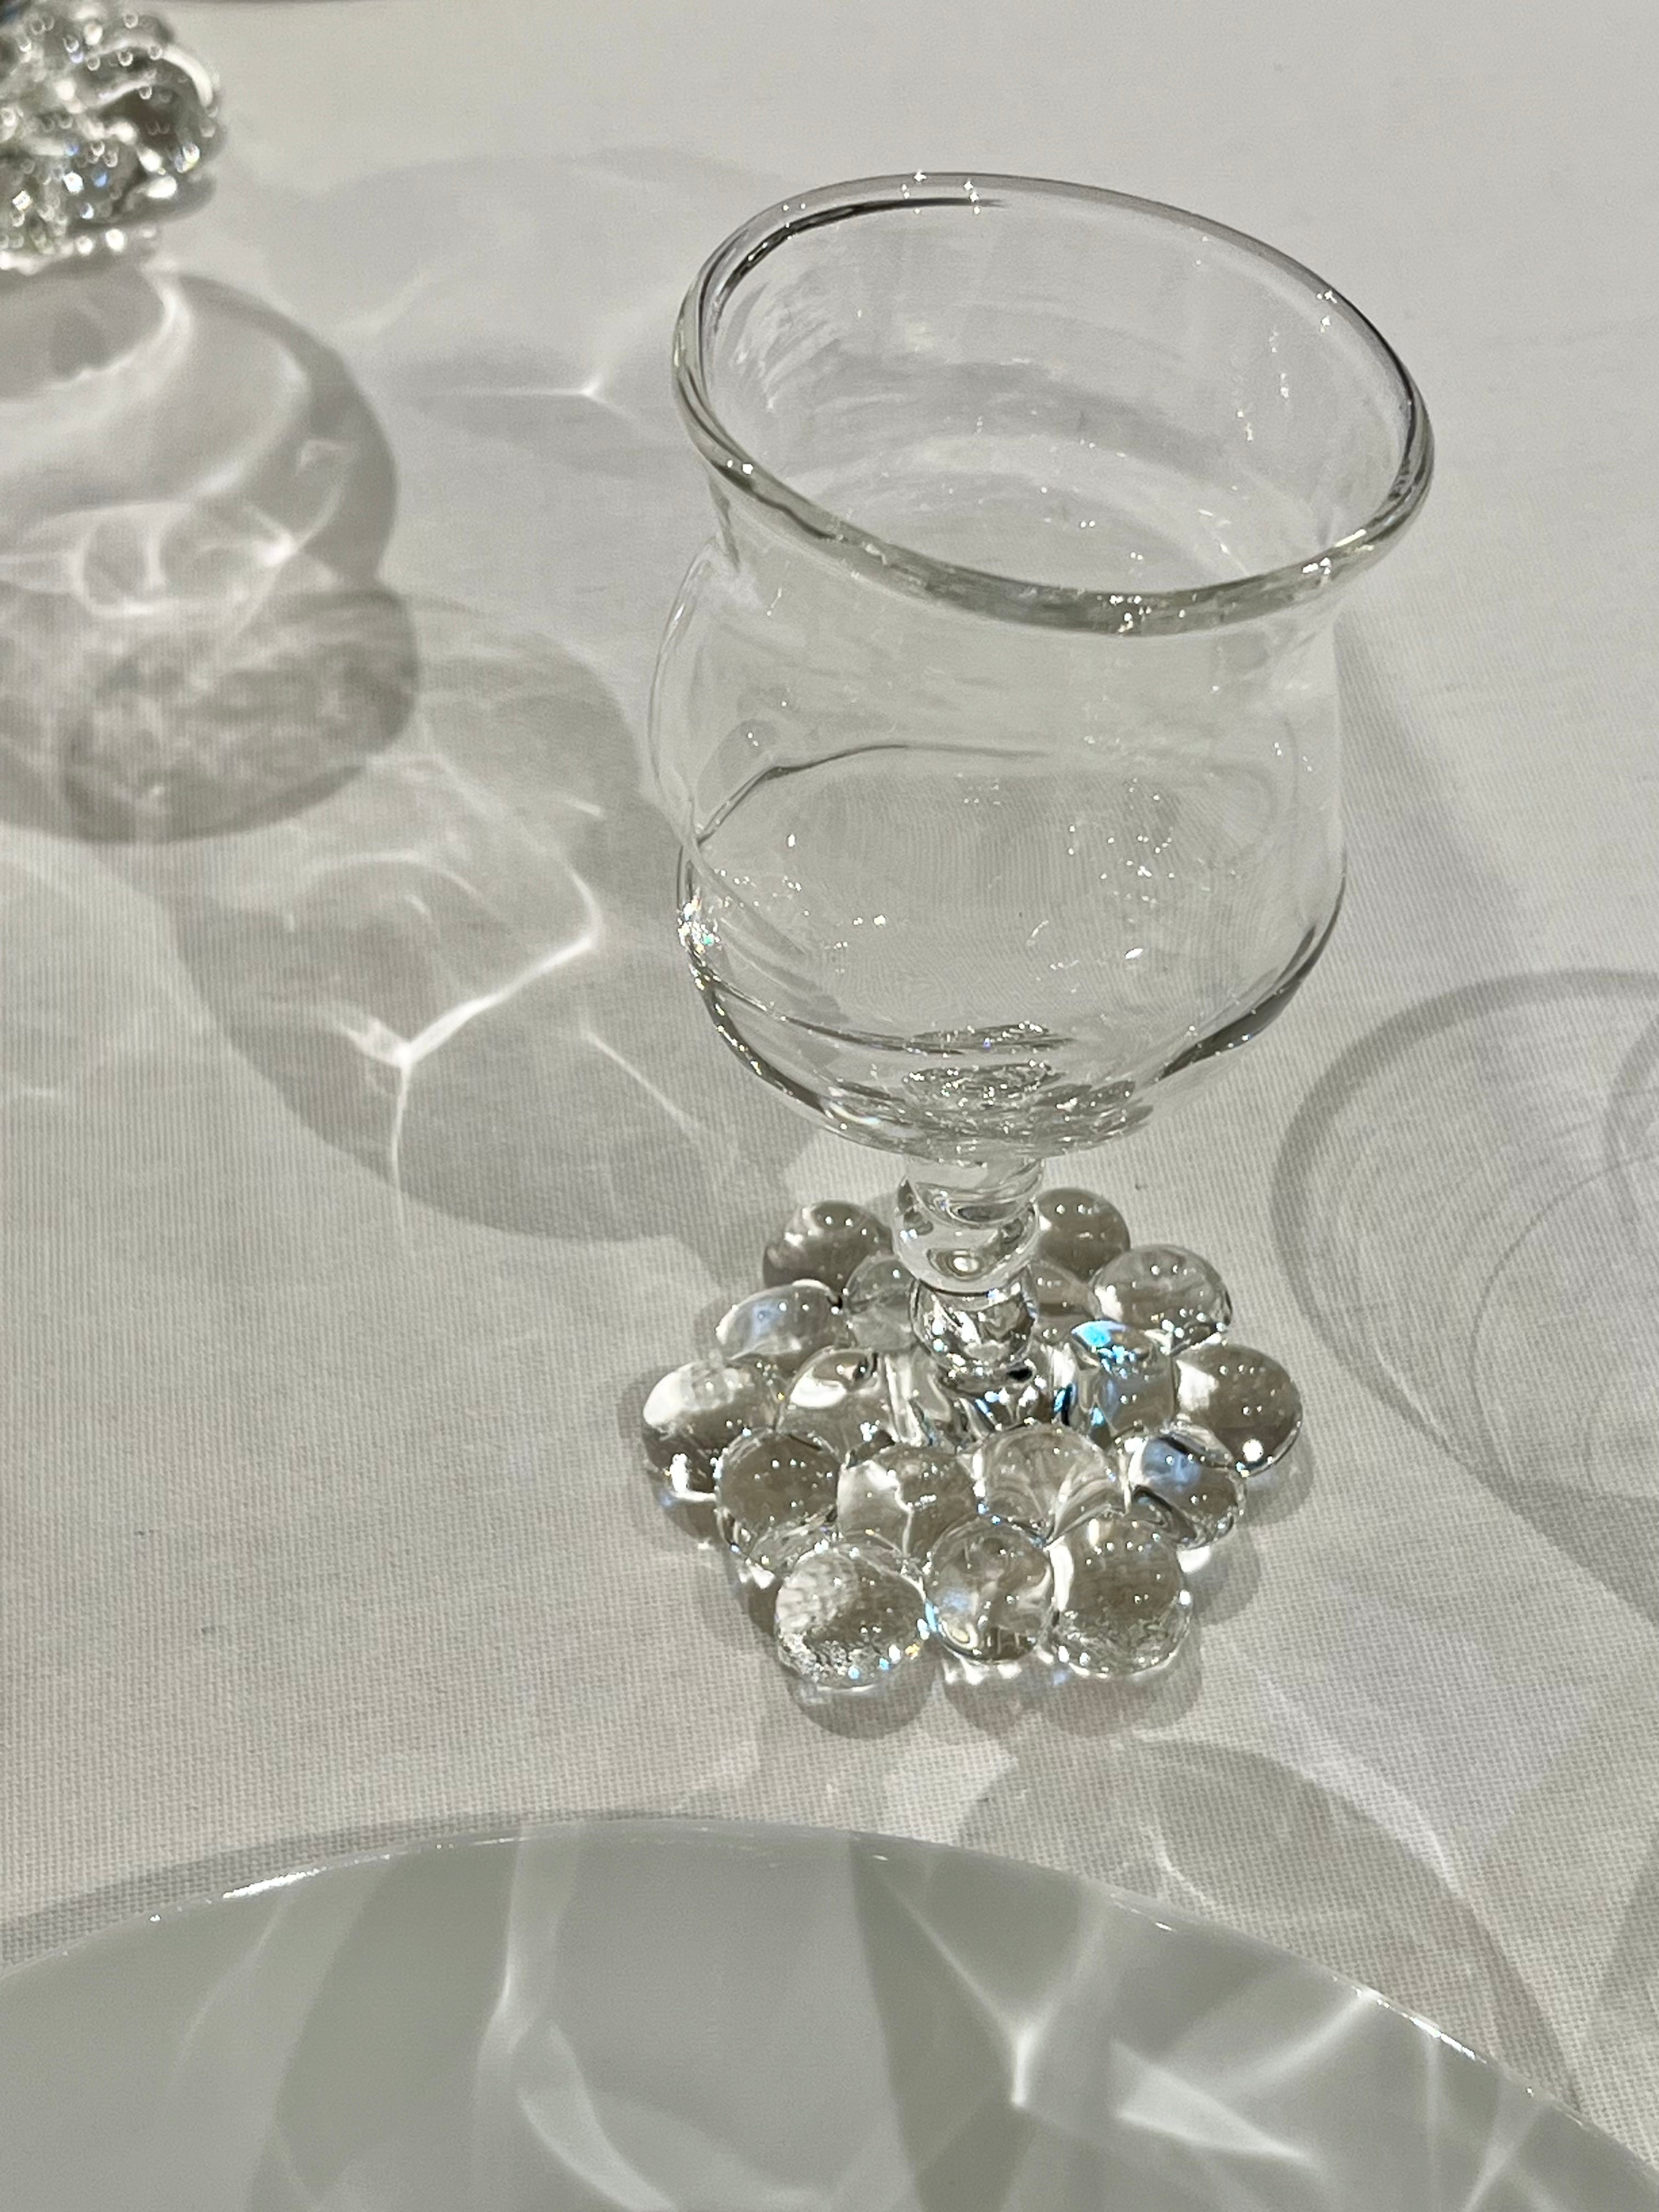 An elegant Justine Menard Mouthblown Wine Glass Set on a white tablecloth, surrounded by decorative clear and iridescent beads that sparkle under soft lighting, casting intricate shadows.